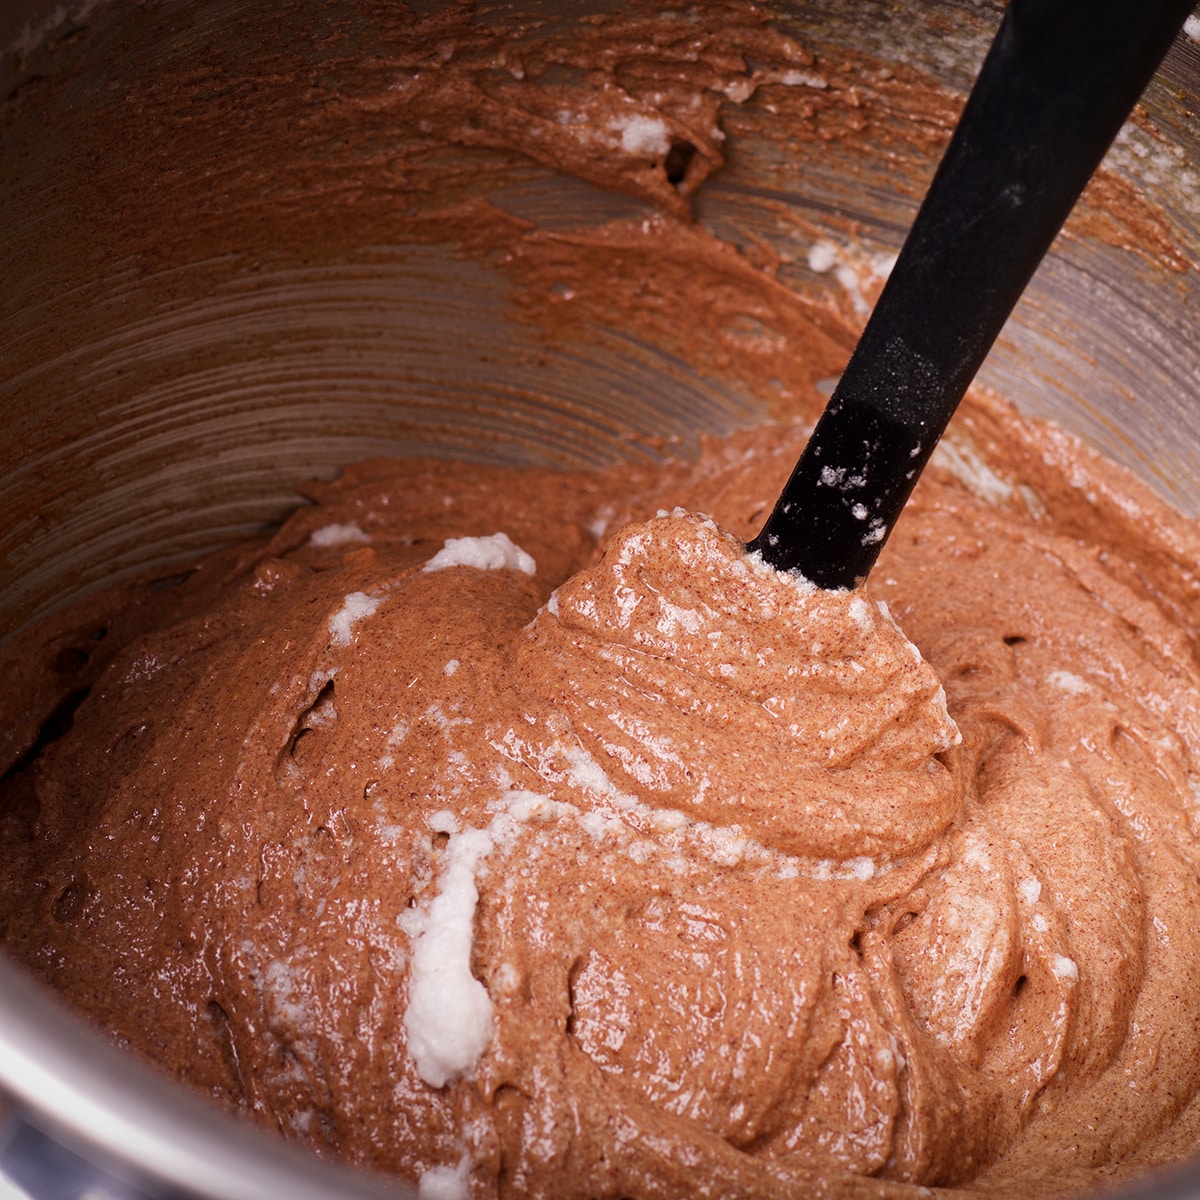 Someone using a rubber spatula to gently stir beaten egg whites into chocolate almond cake batter.